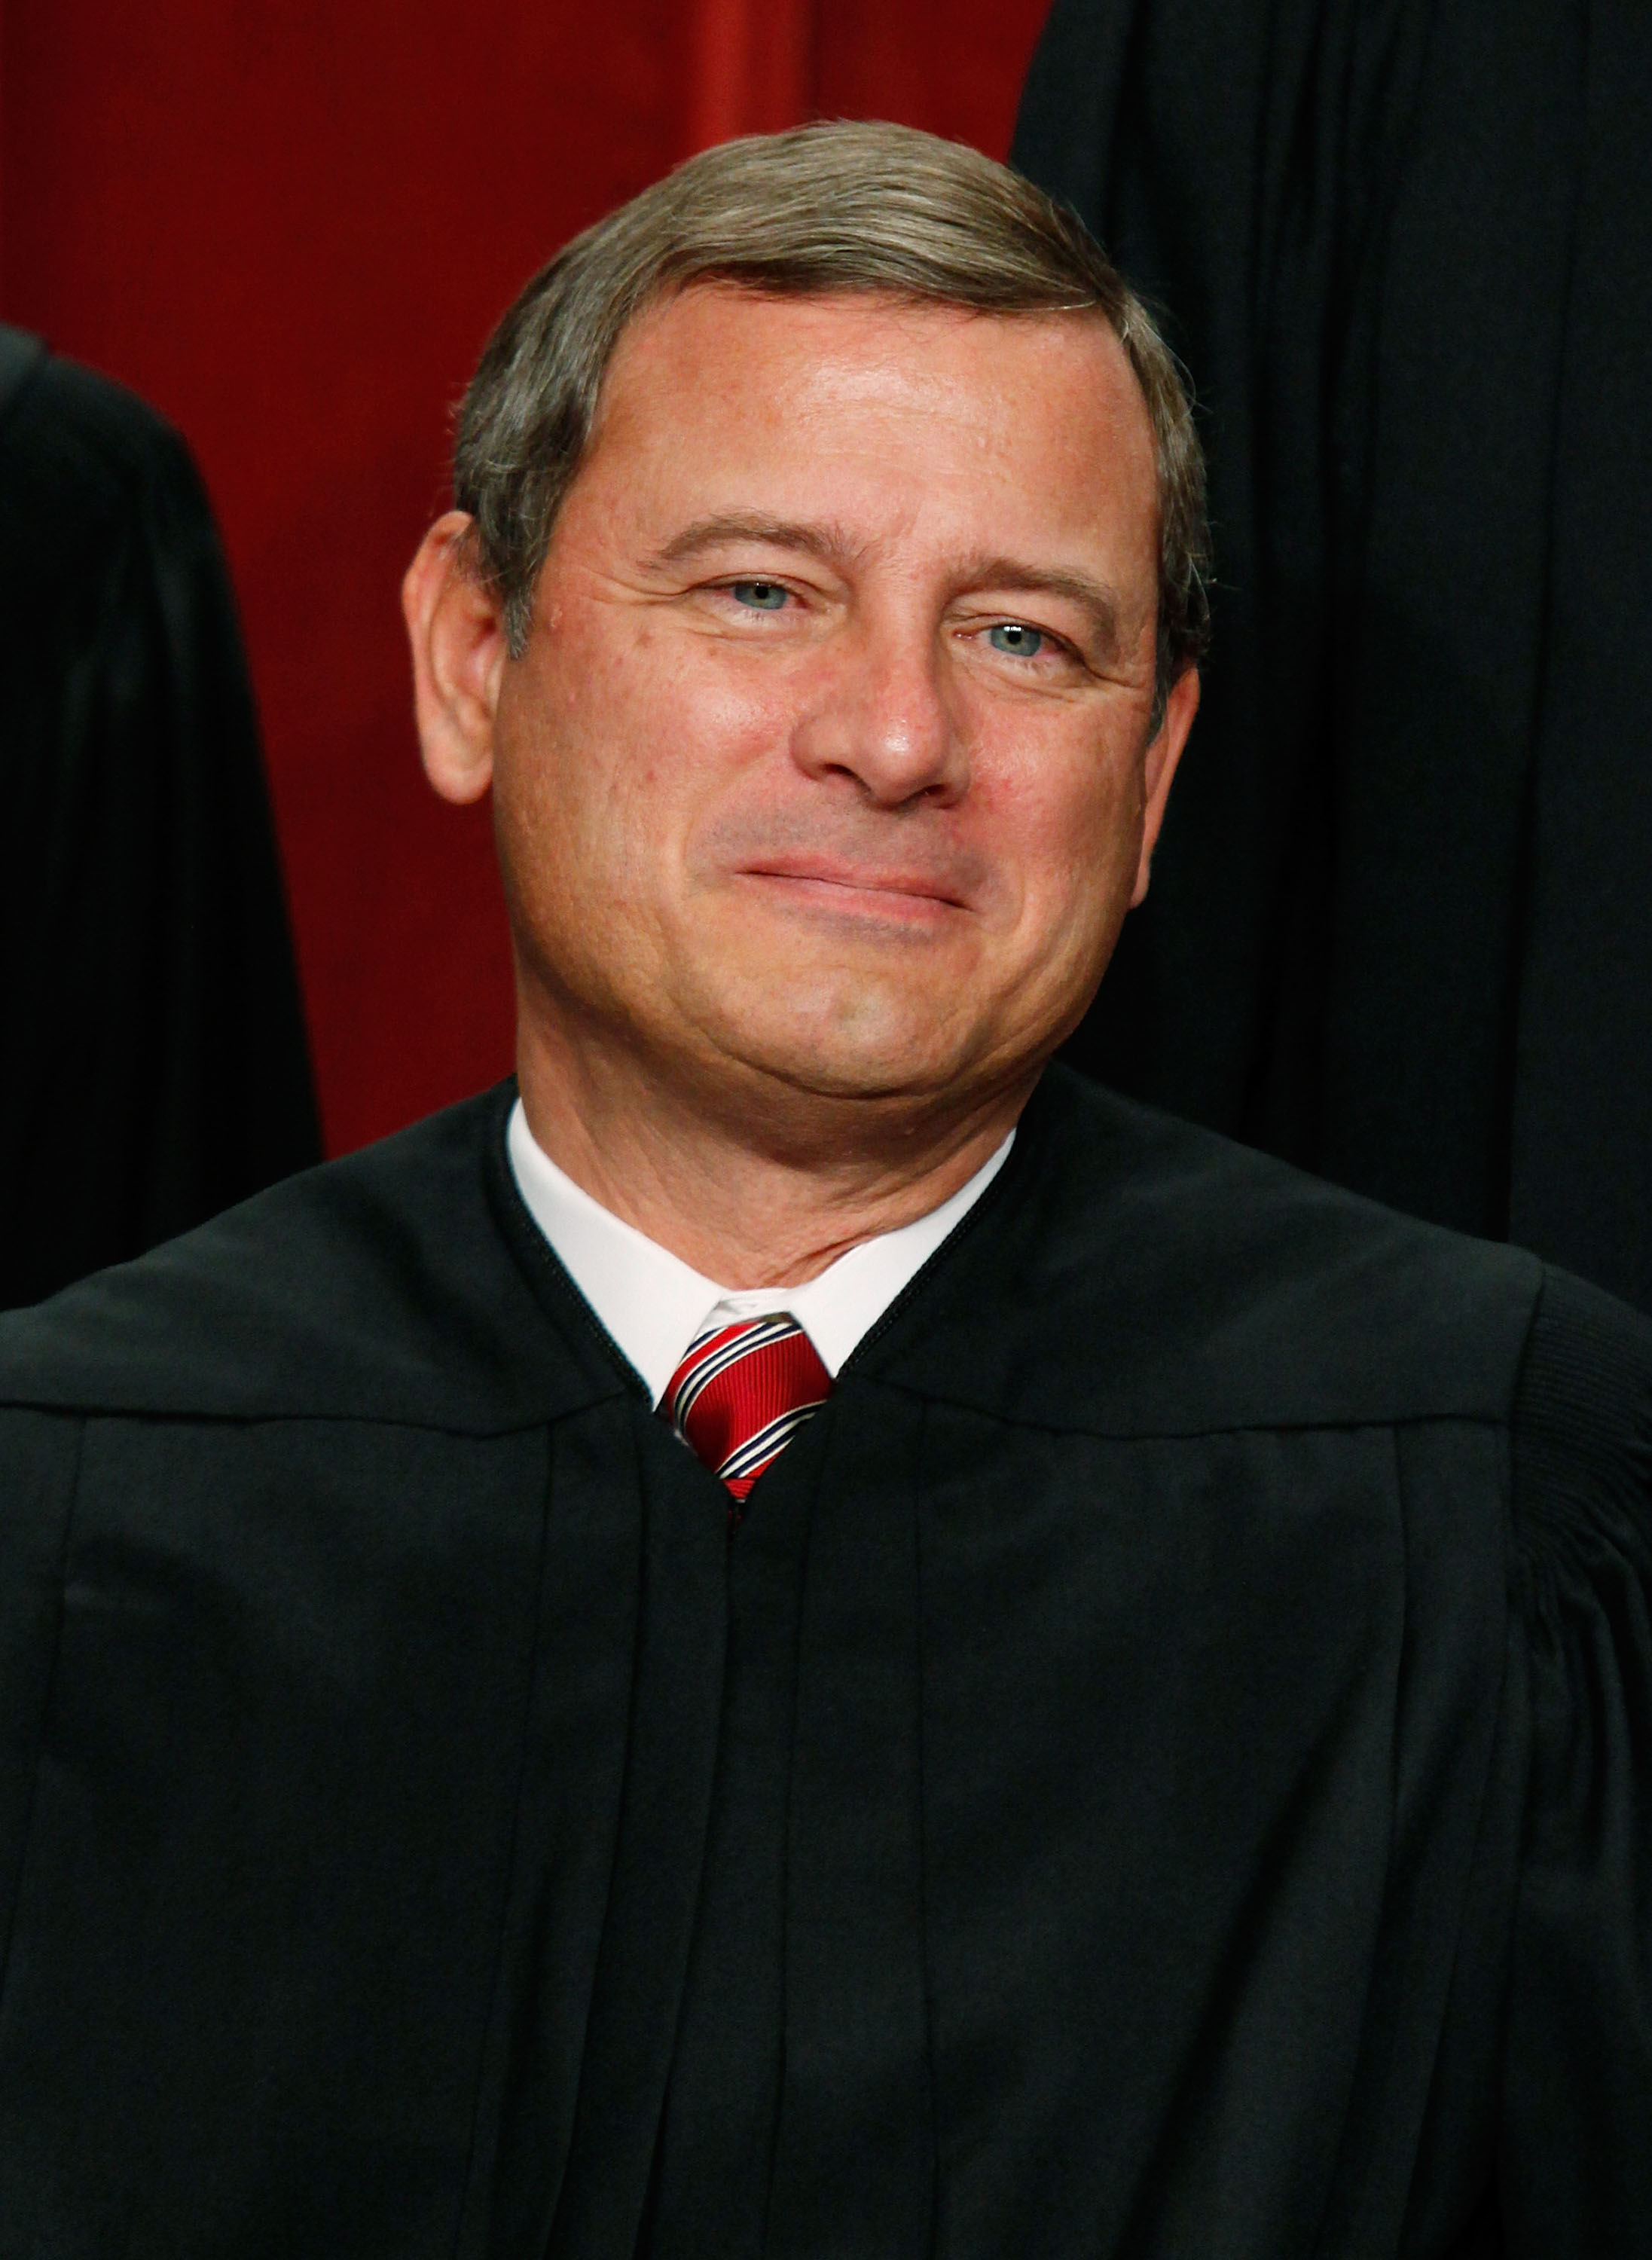 Chief Justice John G. Roberts poses for a group photograph at the Supreme Court building on Sept. 29, 2009 in Washington DC.